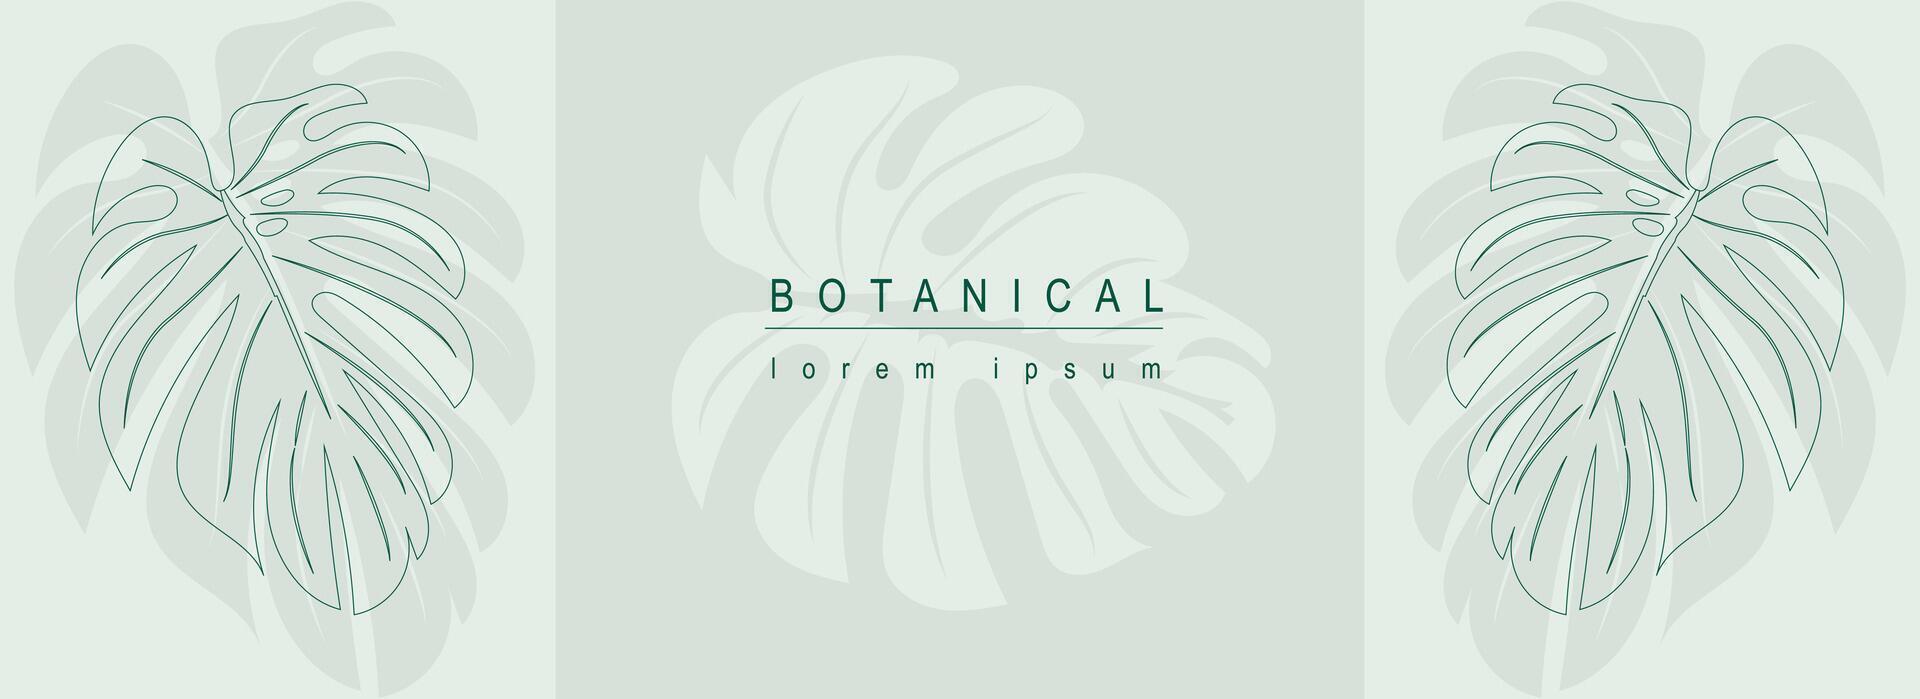 Botanical abstract background with floral line art design. Horizontal web banner in minimal style with green monstera leaves, silhouettes and contour shapes of tropical foliage. Vector illustration.